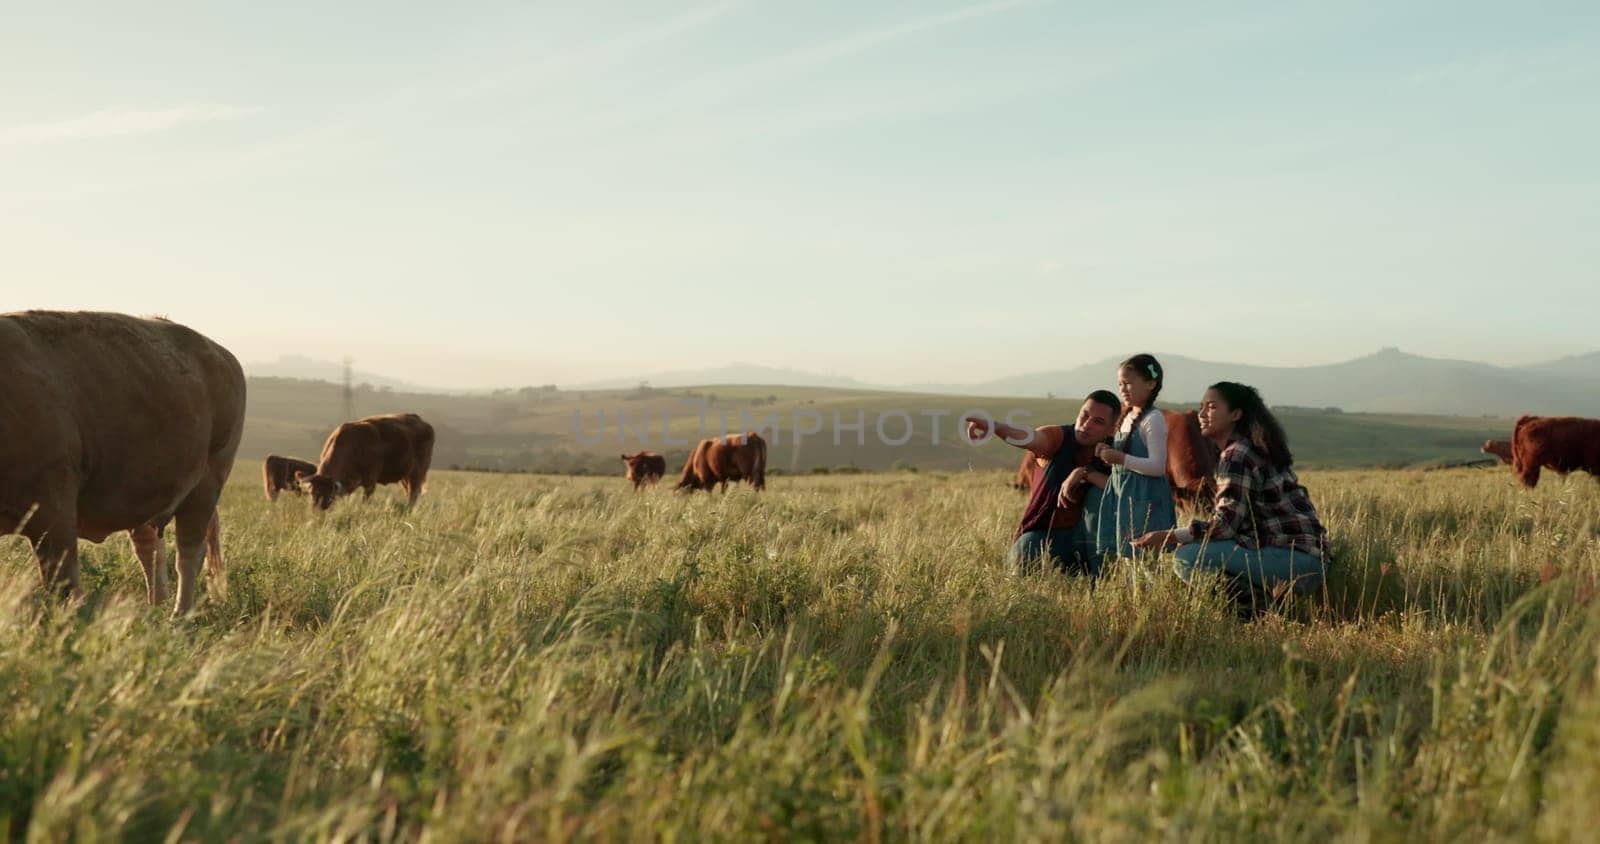 Cattle, cow and farmer with family on a farm bonding, relaxing and enjoying quality time on countryside grass field. Nature, mother and father pointing to animals or cows with his girl, kid or child.